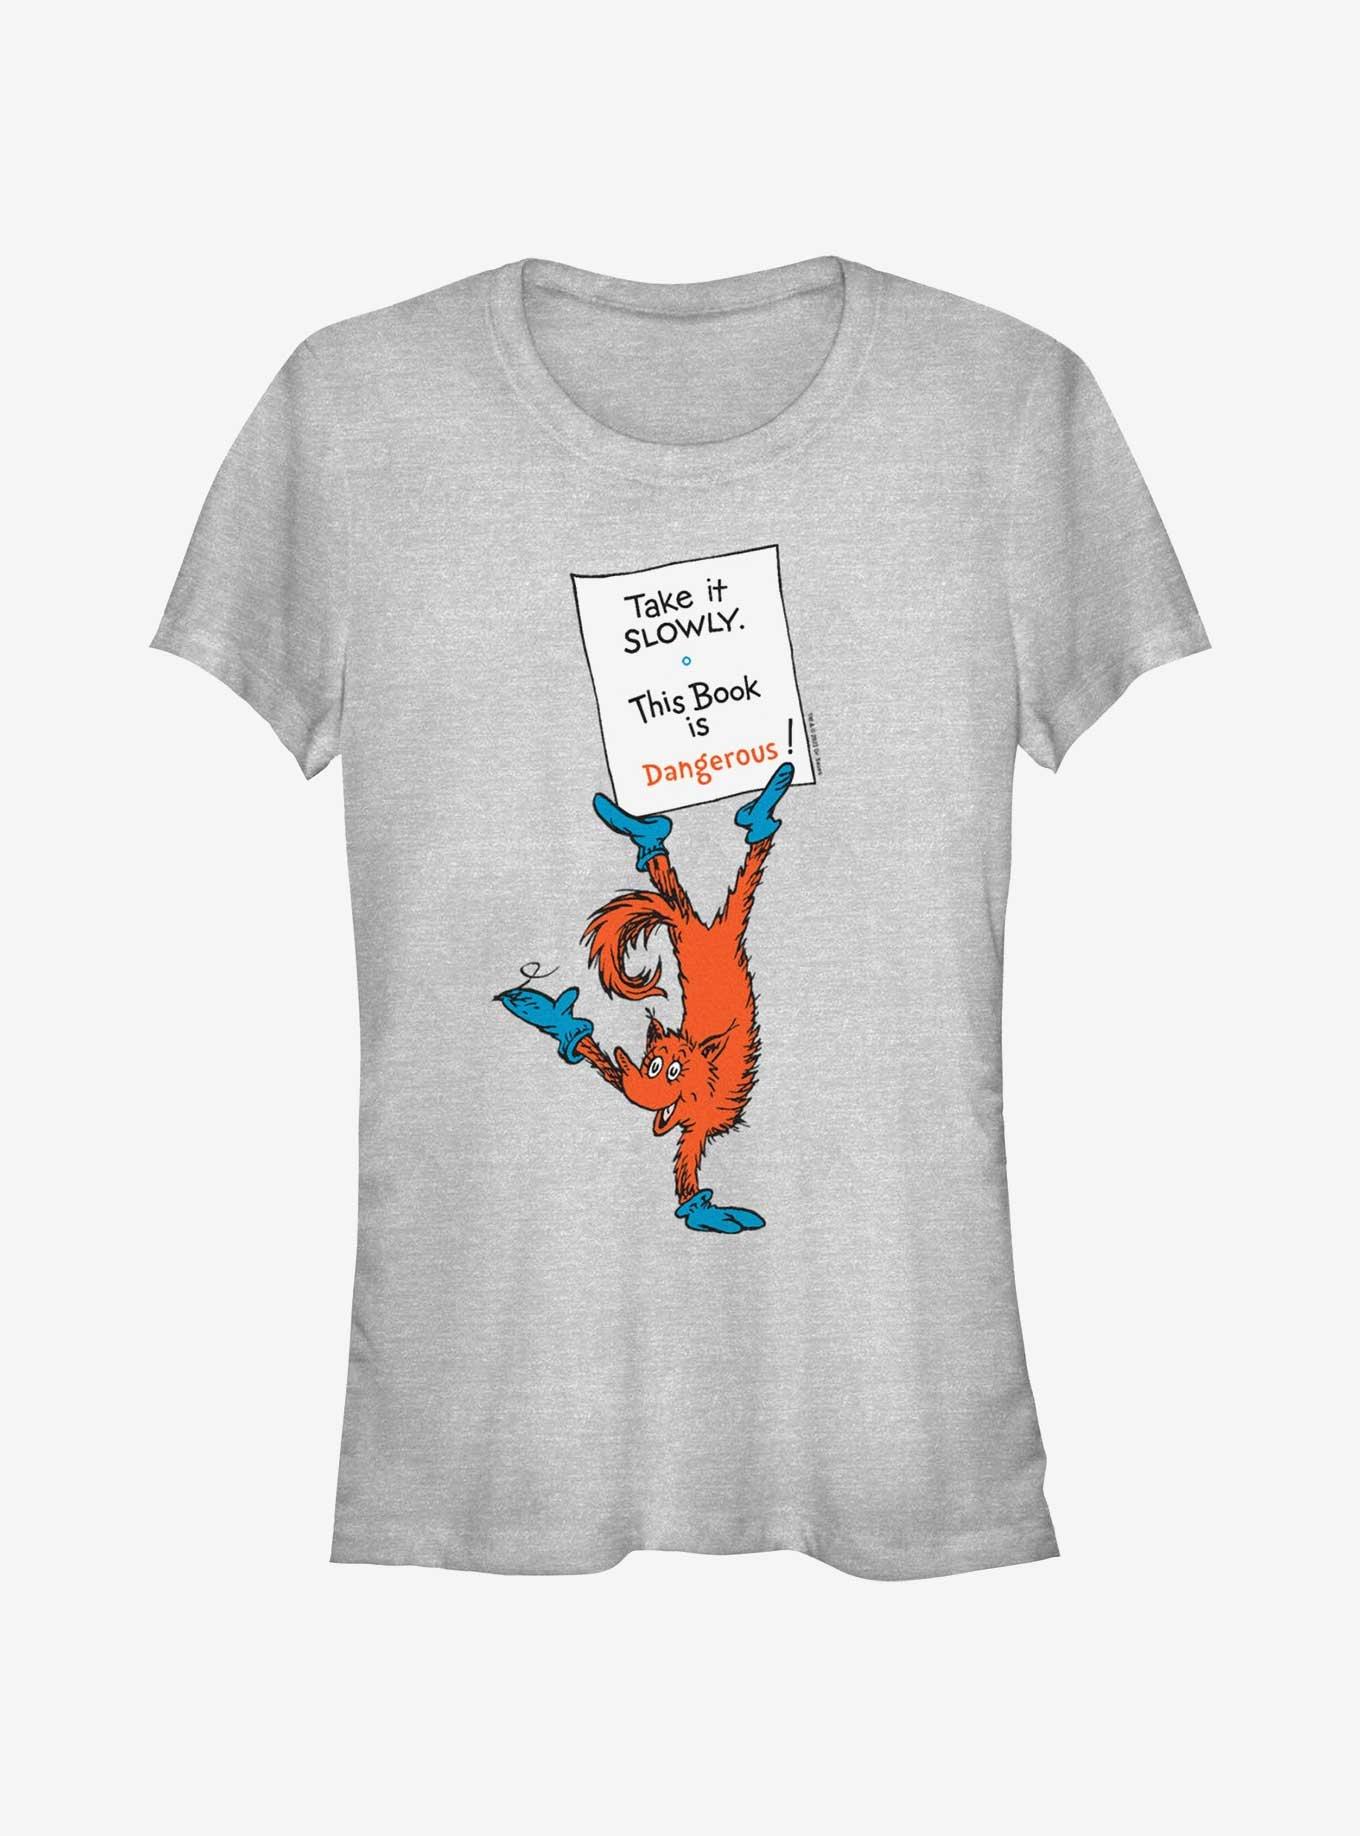 Dr. Seuss Take It Slowly This Book Is Dangerous Girls T-Shirt